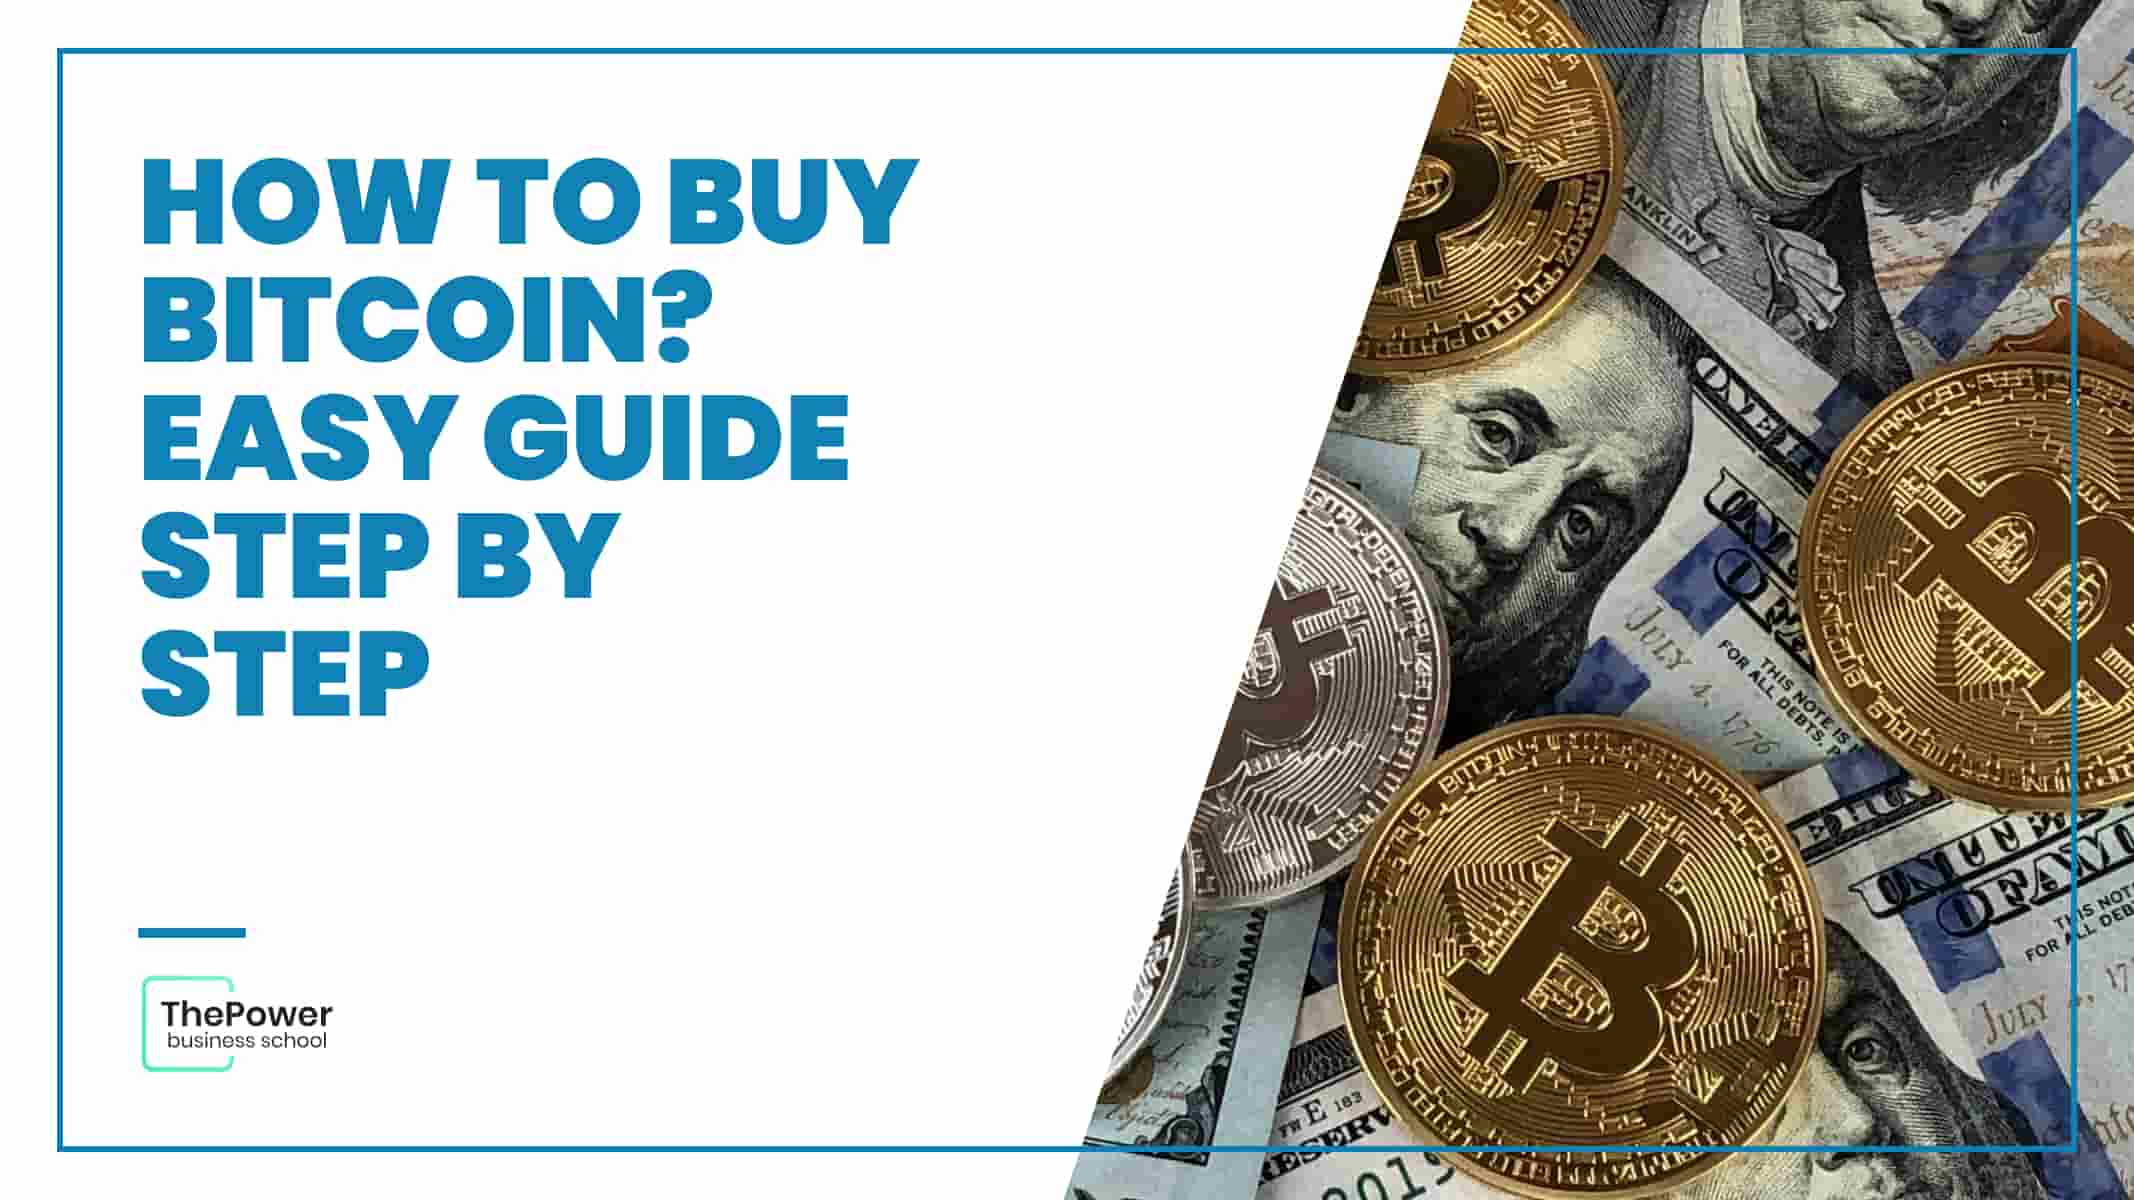 how to buy bitcoin as graphic designer